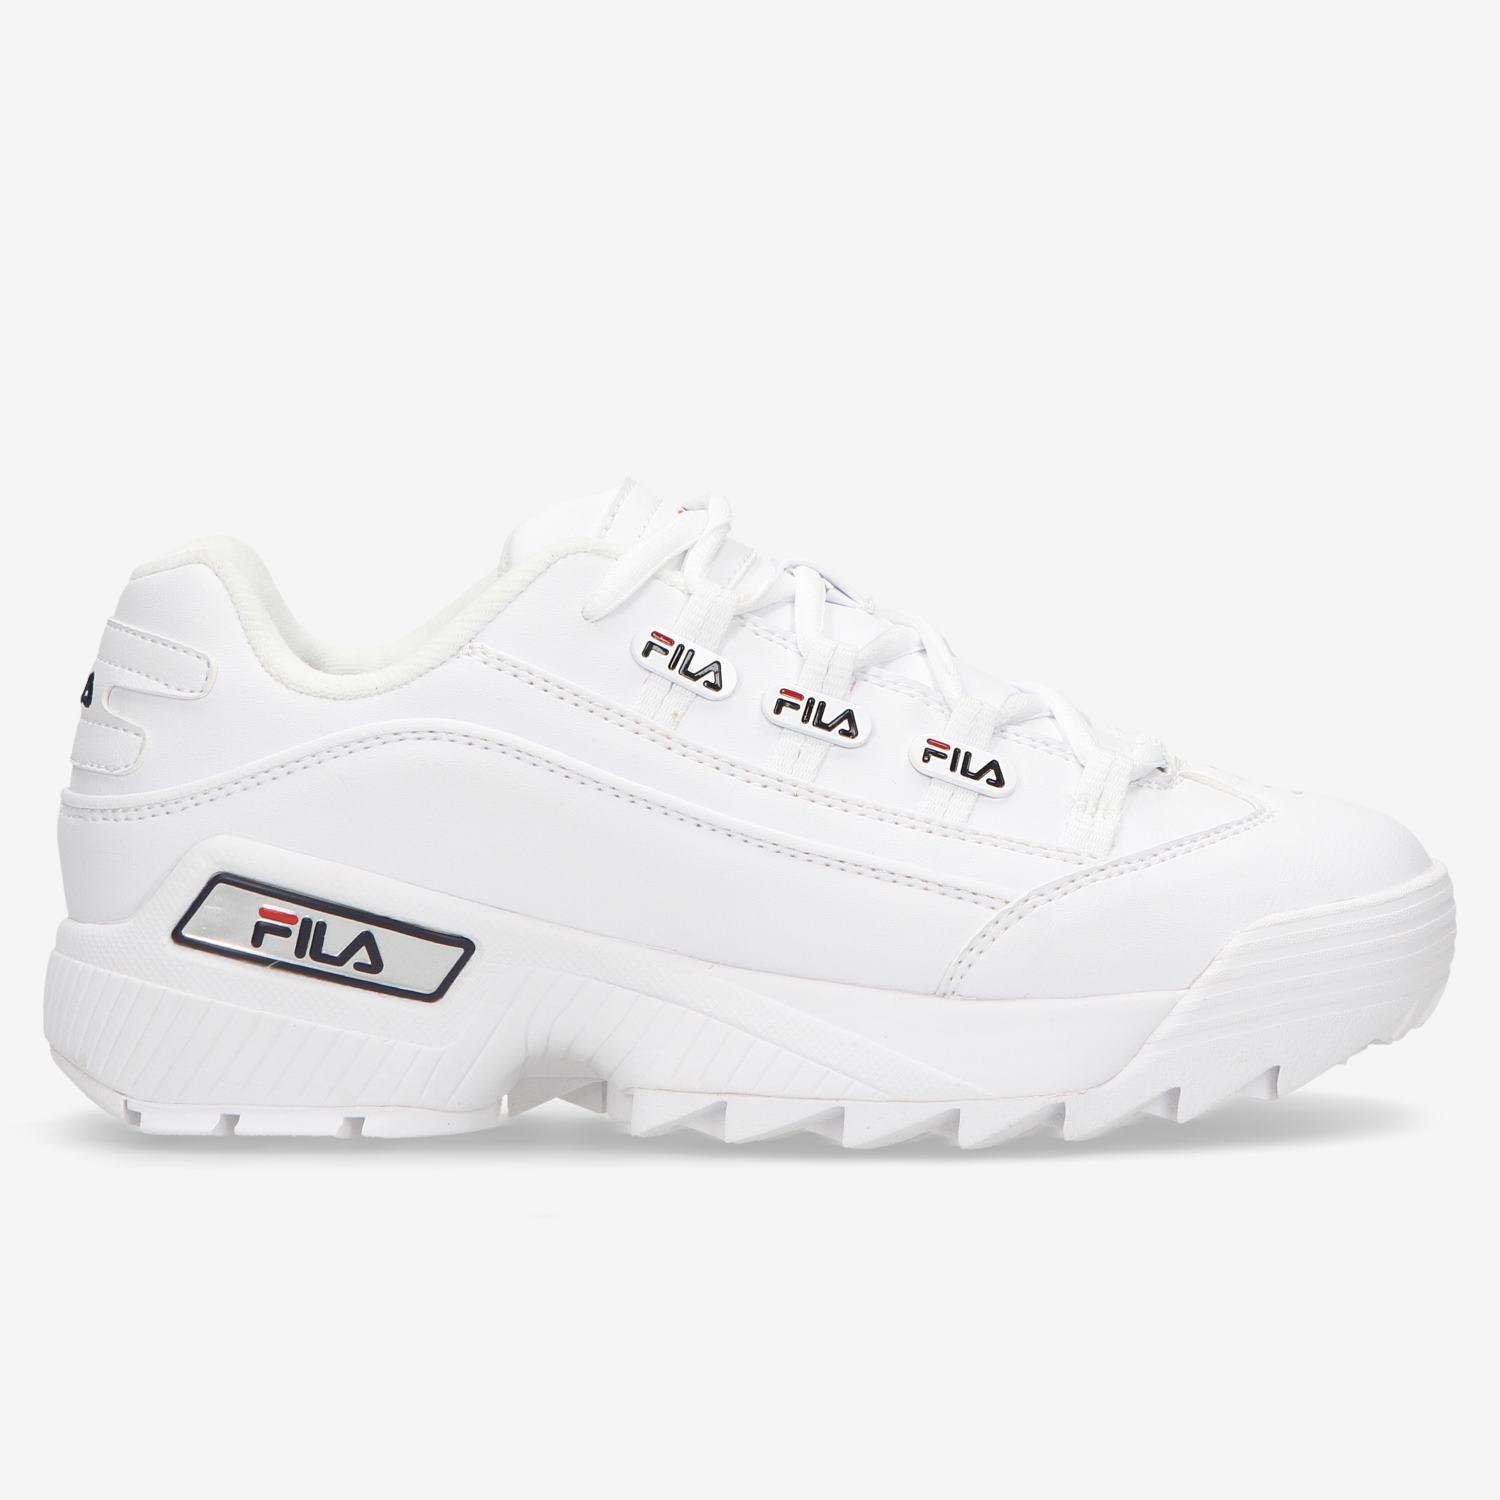 Fila Negras, Buy Now, Factory Sale, 52% OFF, lichtstrahl.org